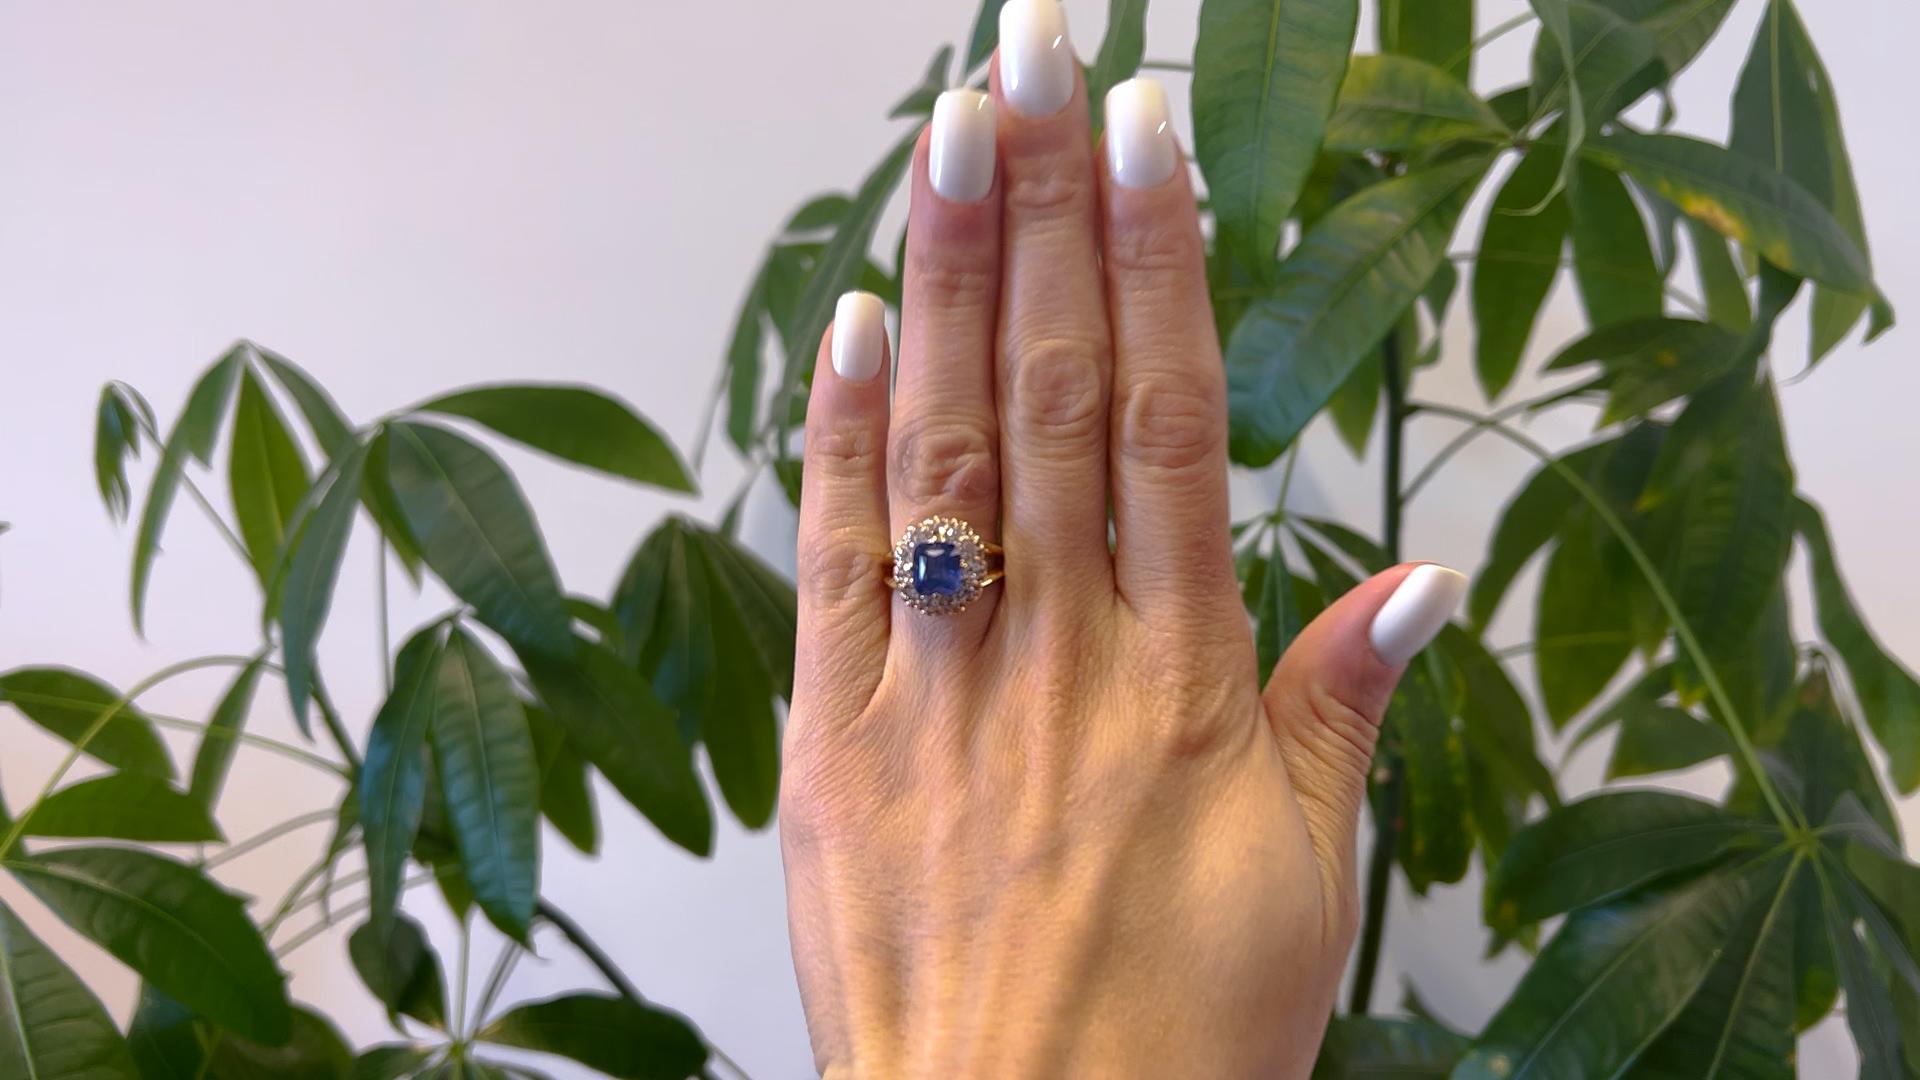 One Late Victorian GIA 3.33 Carat Ceylon Sapphire and Diamond 14k Gold Cluster Ring. Featuring one GIA cushion cut sapphire of 3.33 carats, accompanied with GIA #2235076082 stating the sapphire is Ceylon (Sri Lanka) origin. Accented by 11 old